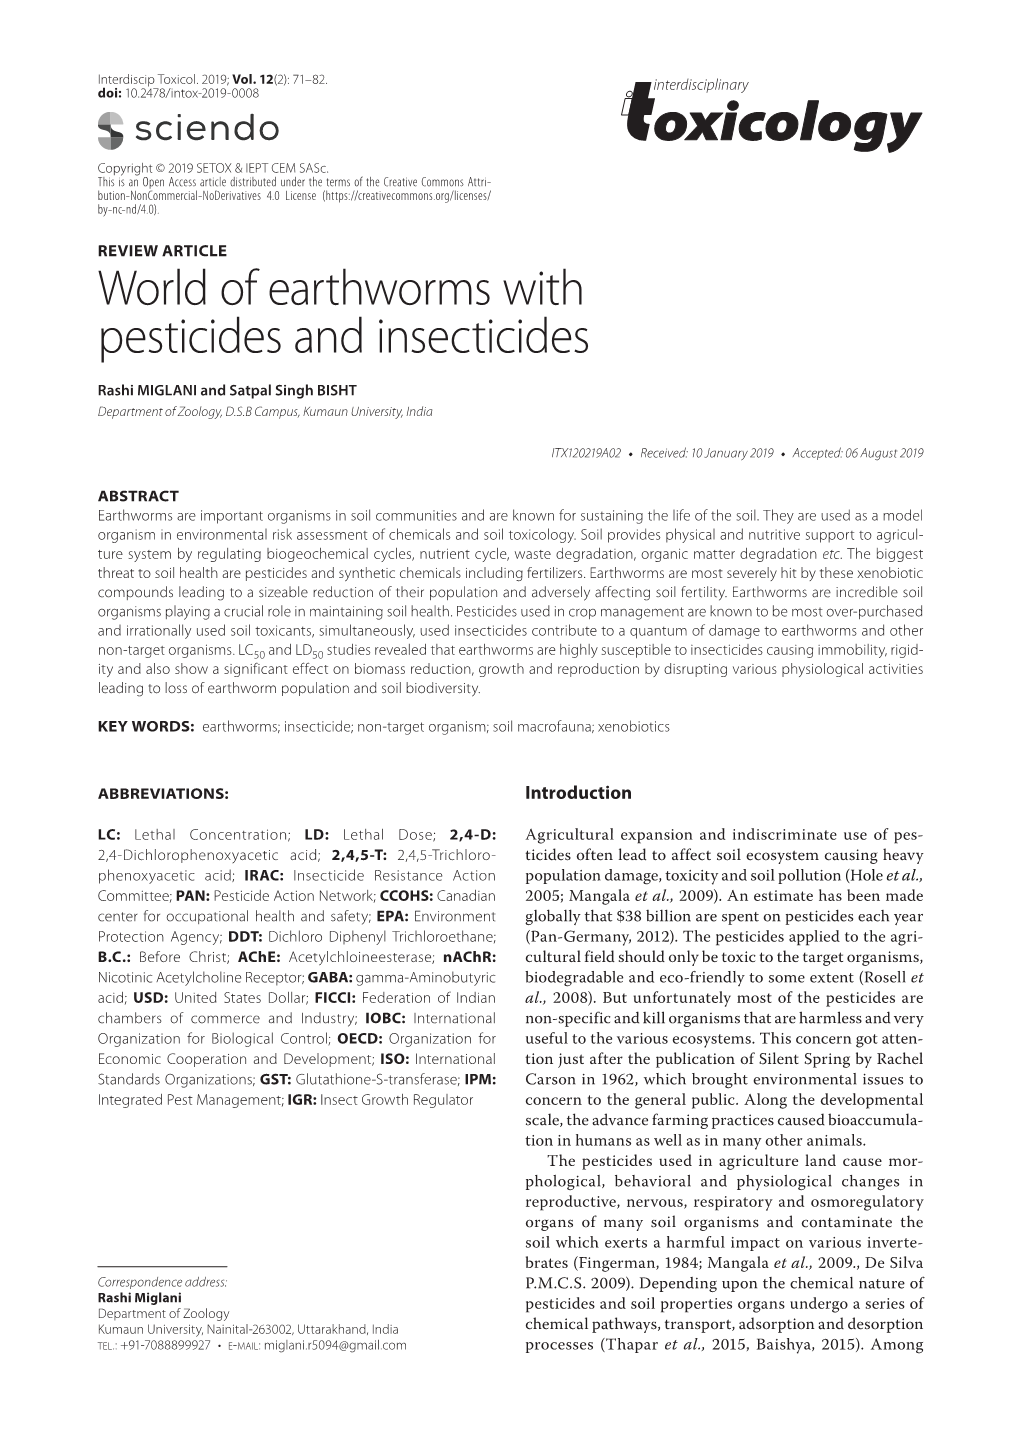 World of Earthworms with Pesticides and Insecticides